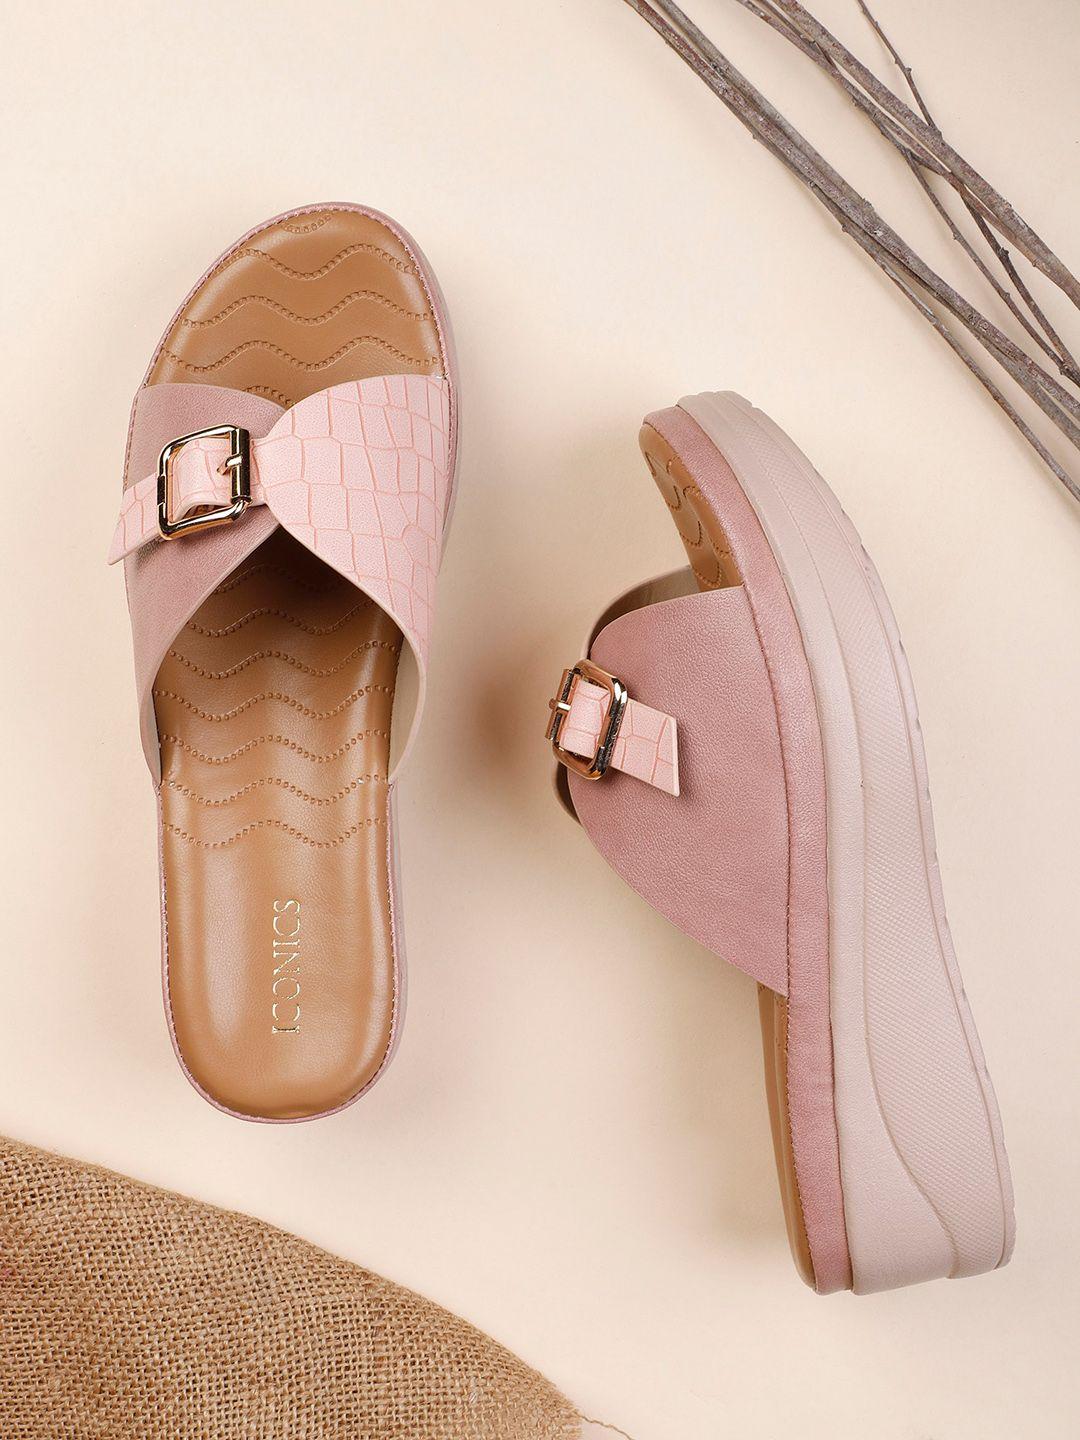 iconics peach-coloured block sandals with buckles